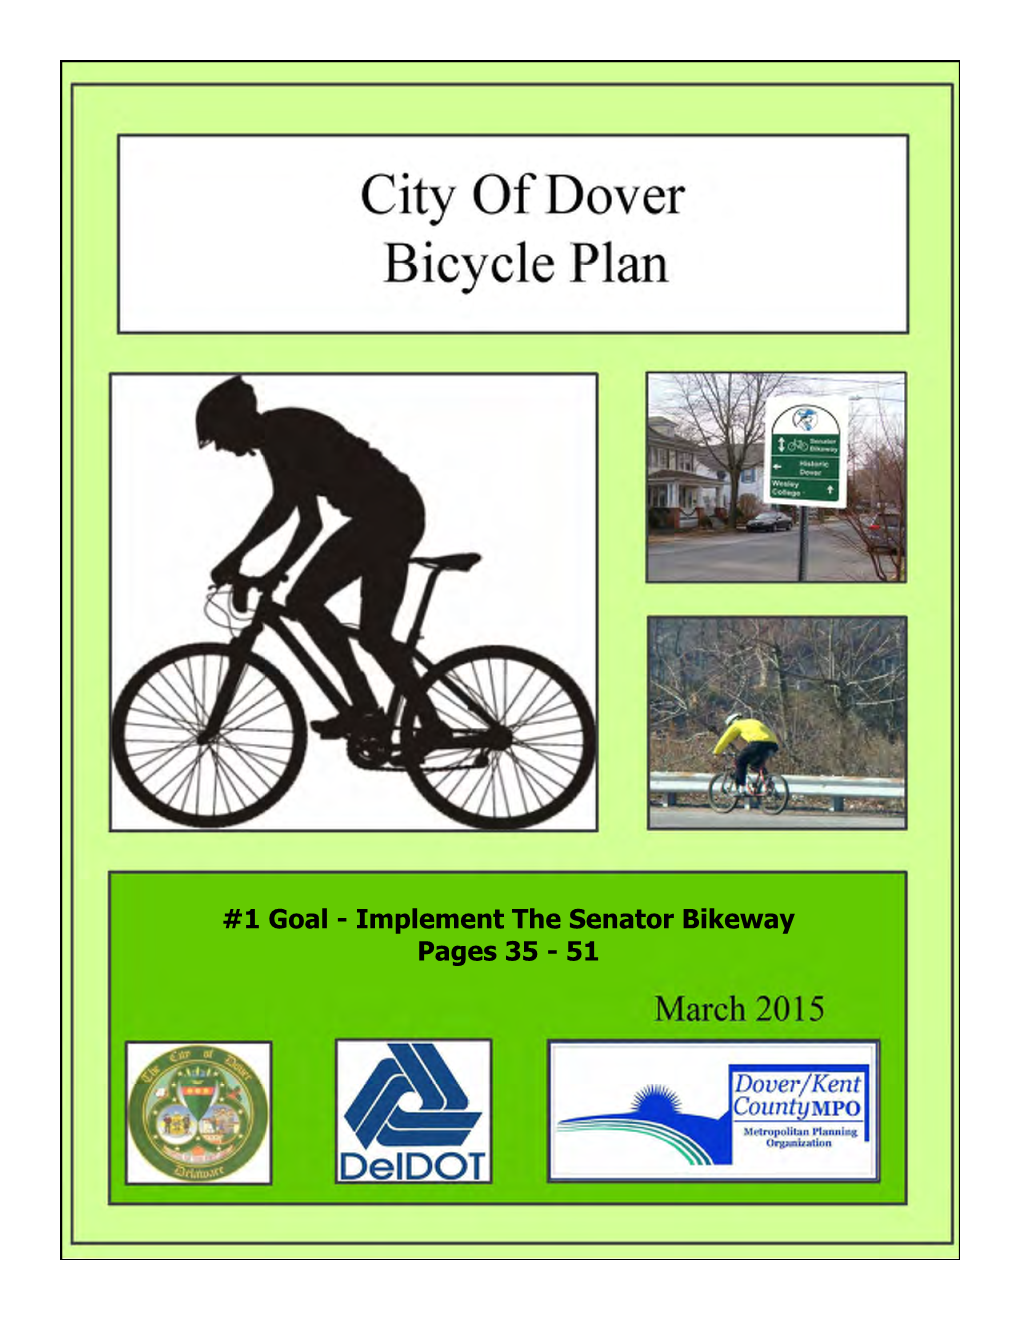 Dover Bicycle Plan Is the Product of a Planning Process That Was Initiated by Public Interest and Support